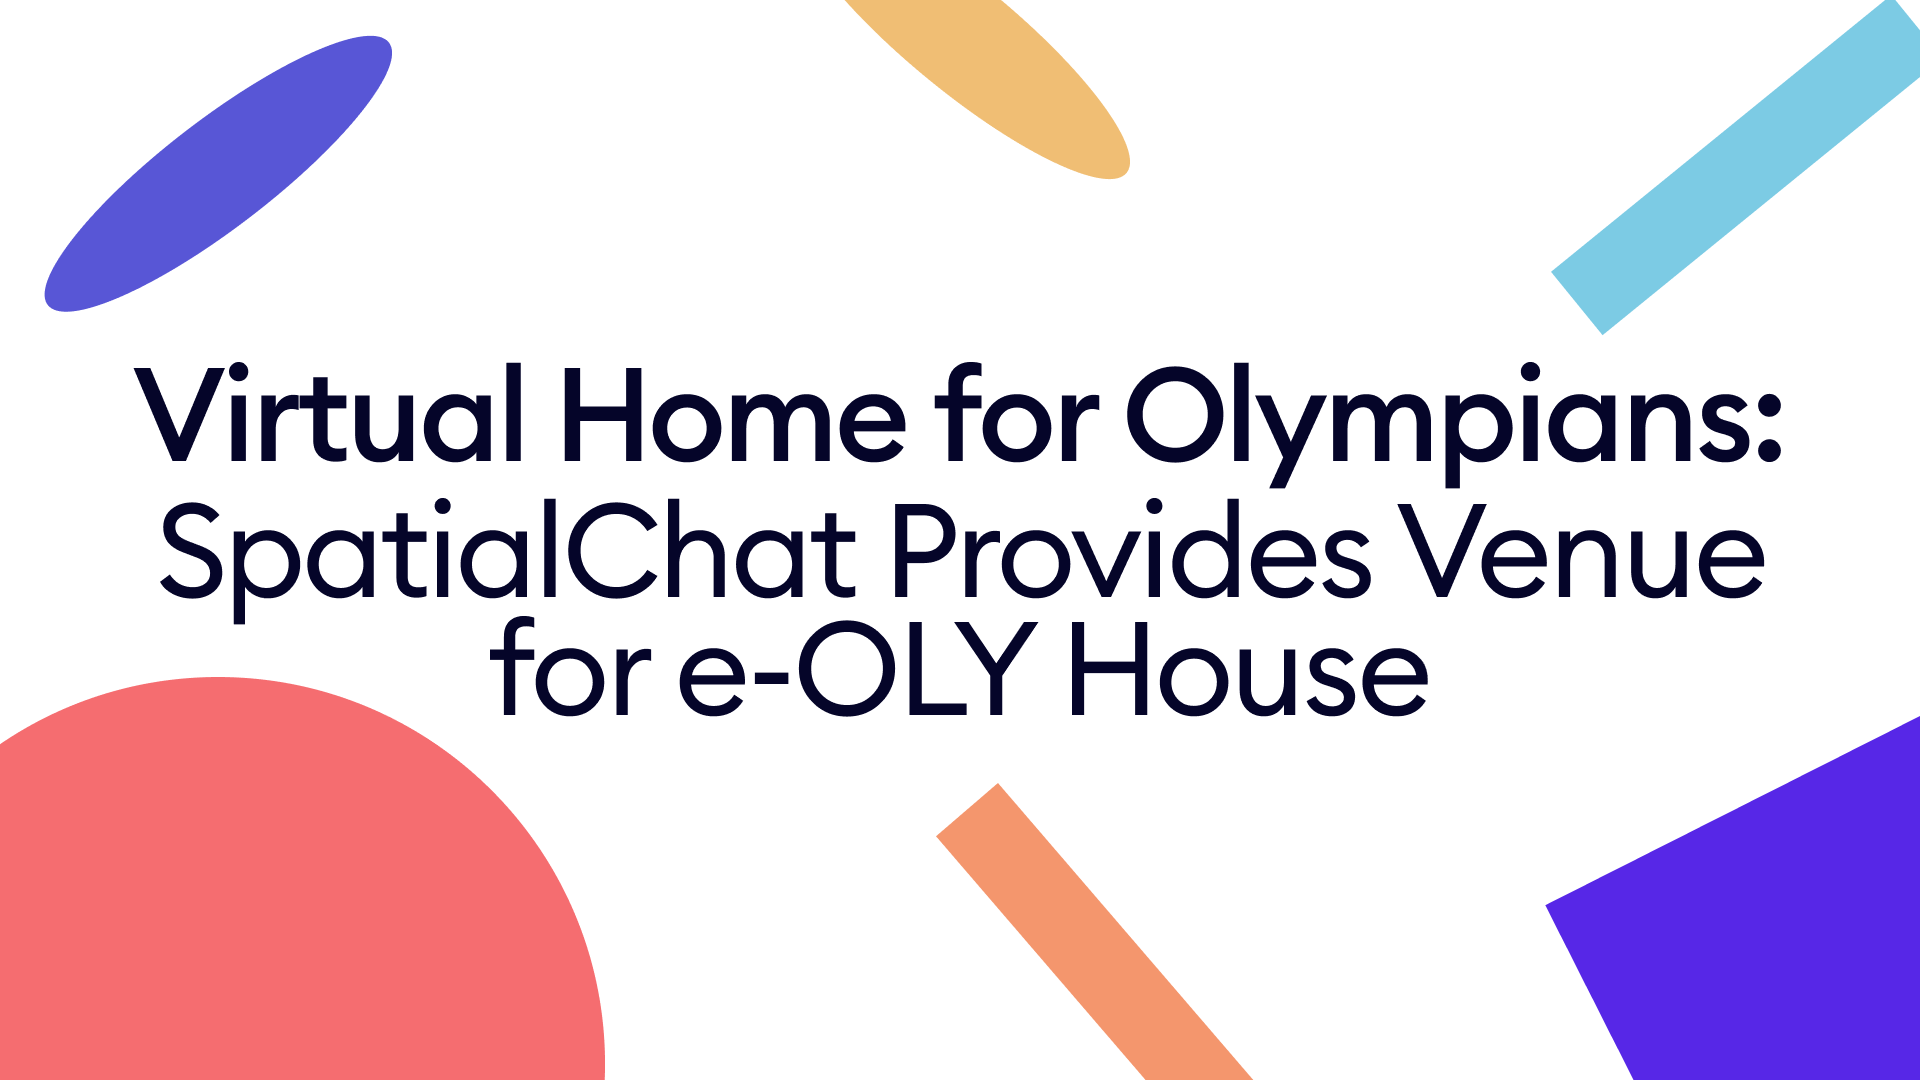 Virtual Home for Olympians: SpatialChat Provides Venue for e-OLY House